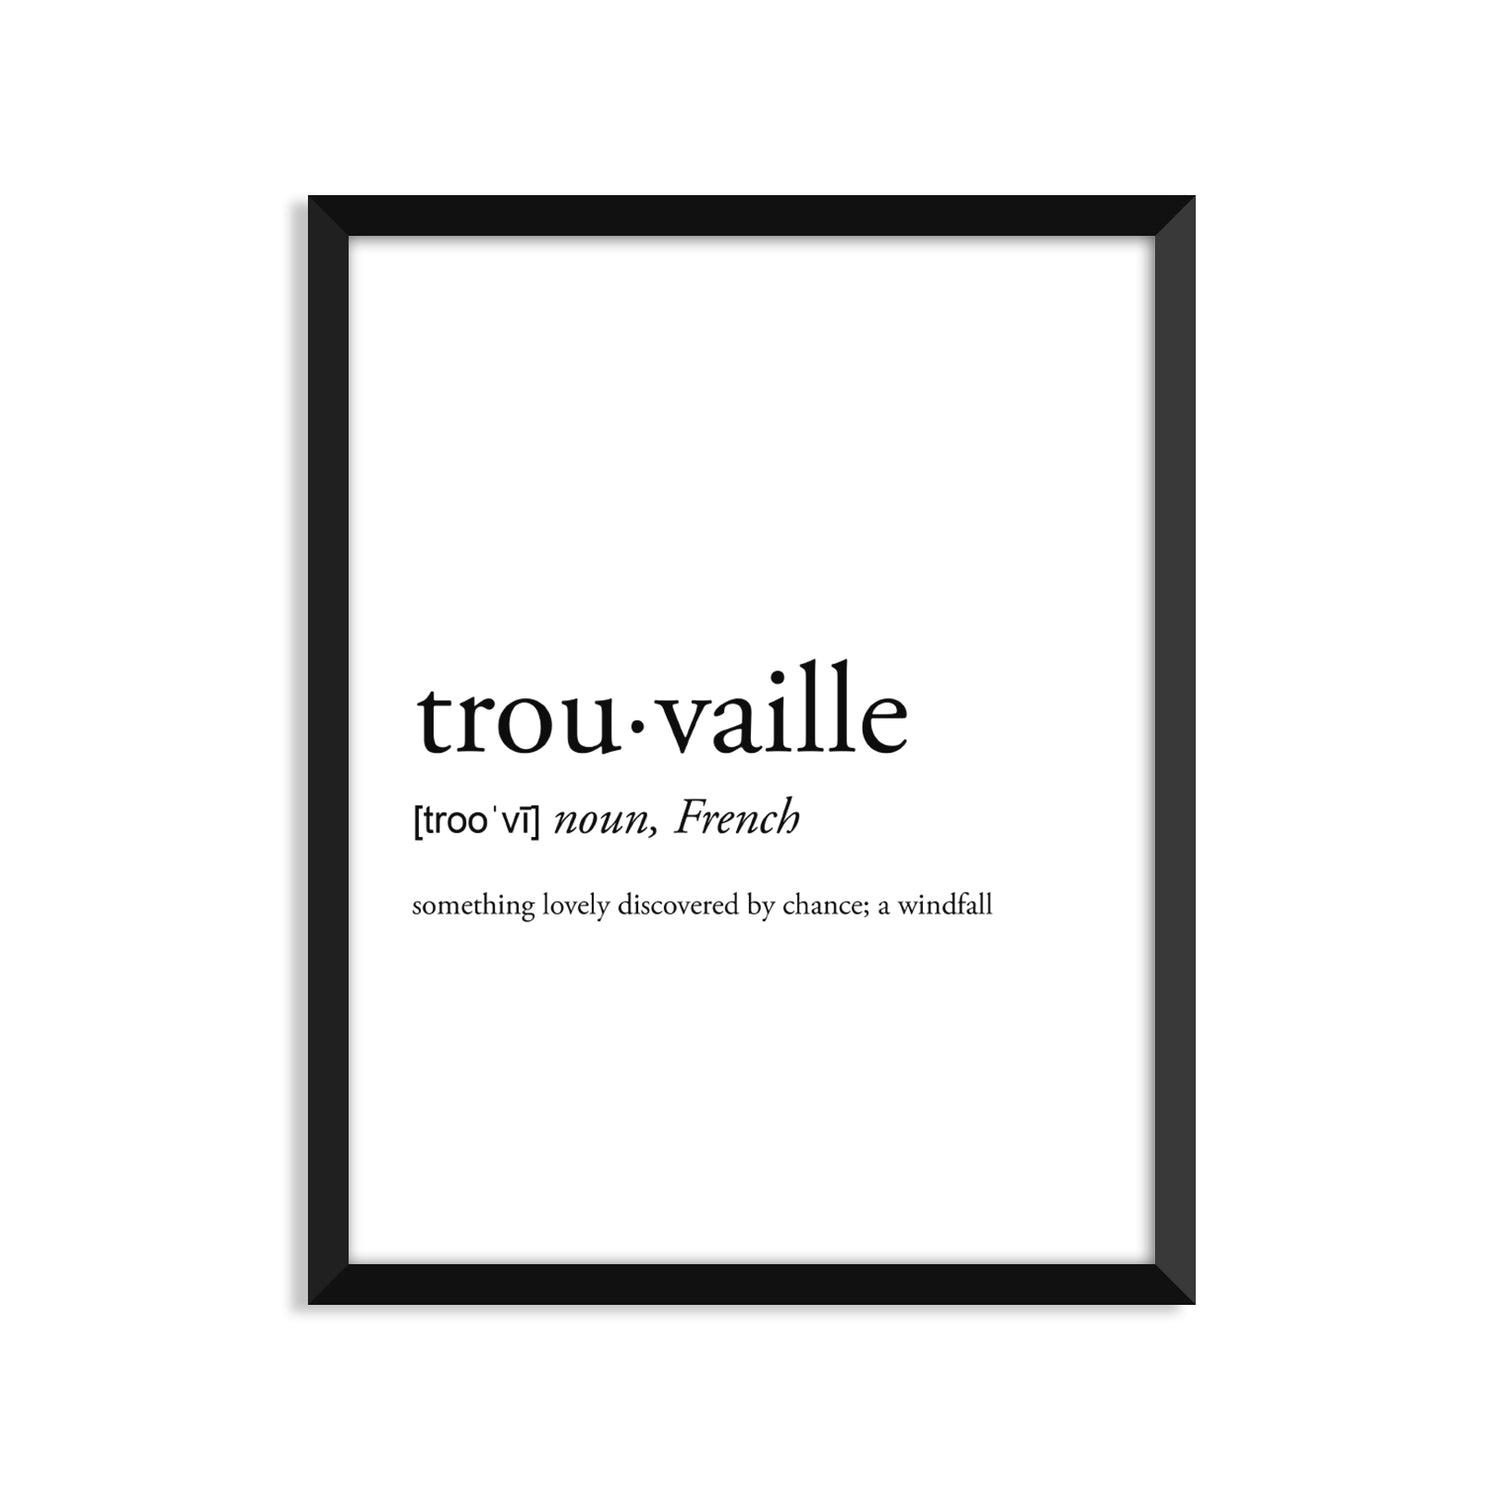 Trouvaille Definition - Unframed Art Print Or Greeting Card